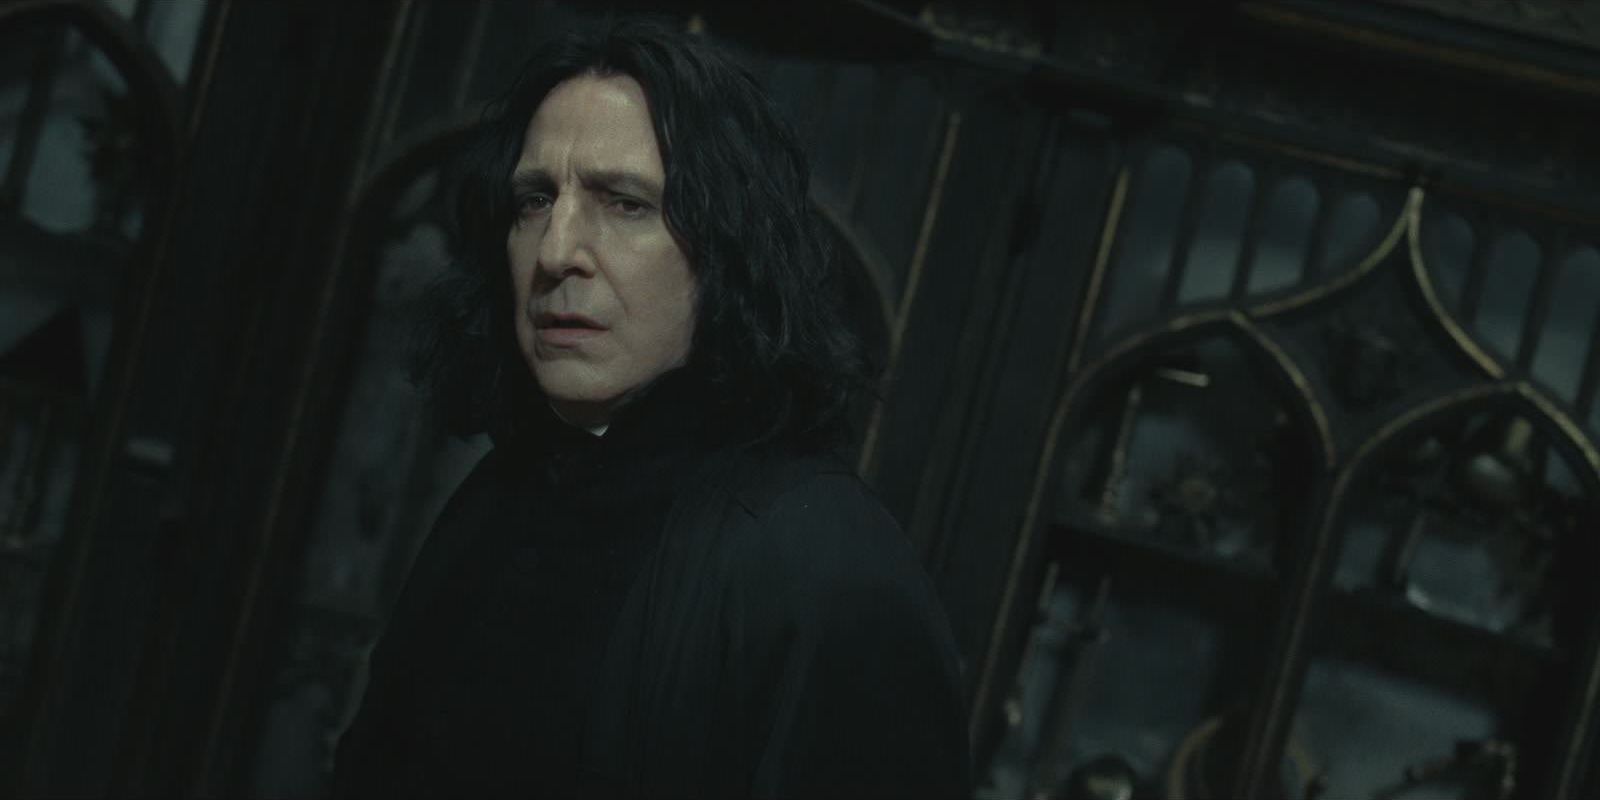 Snape looking confused in a dark room in Harry Potter